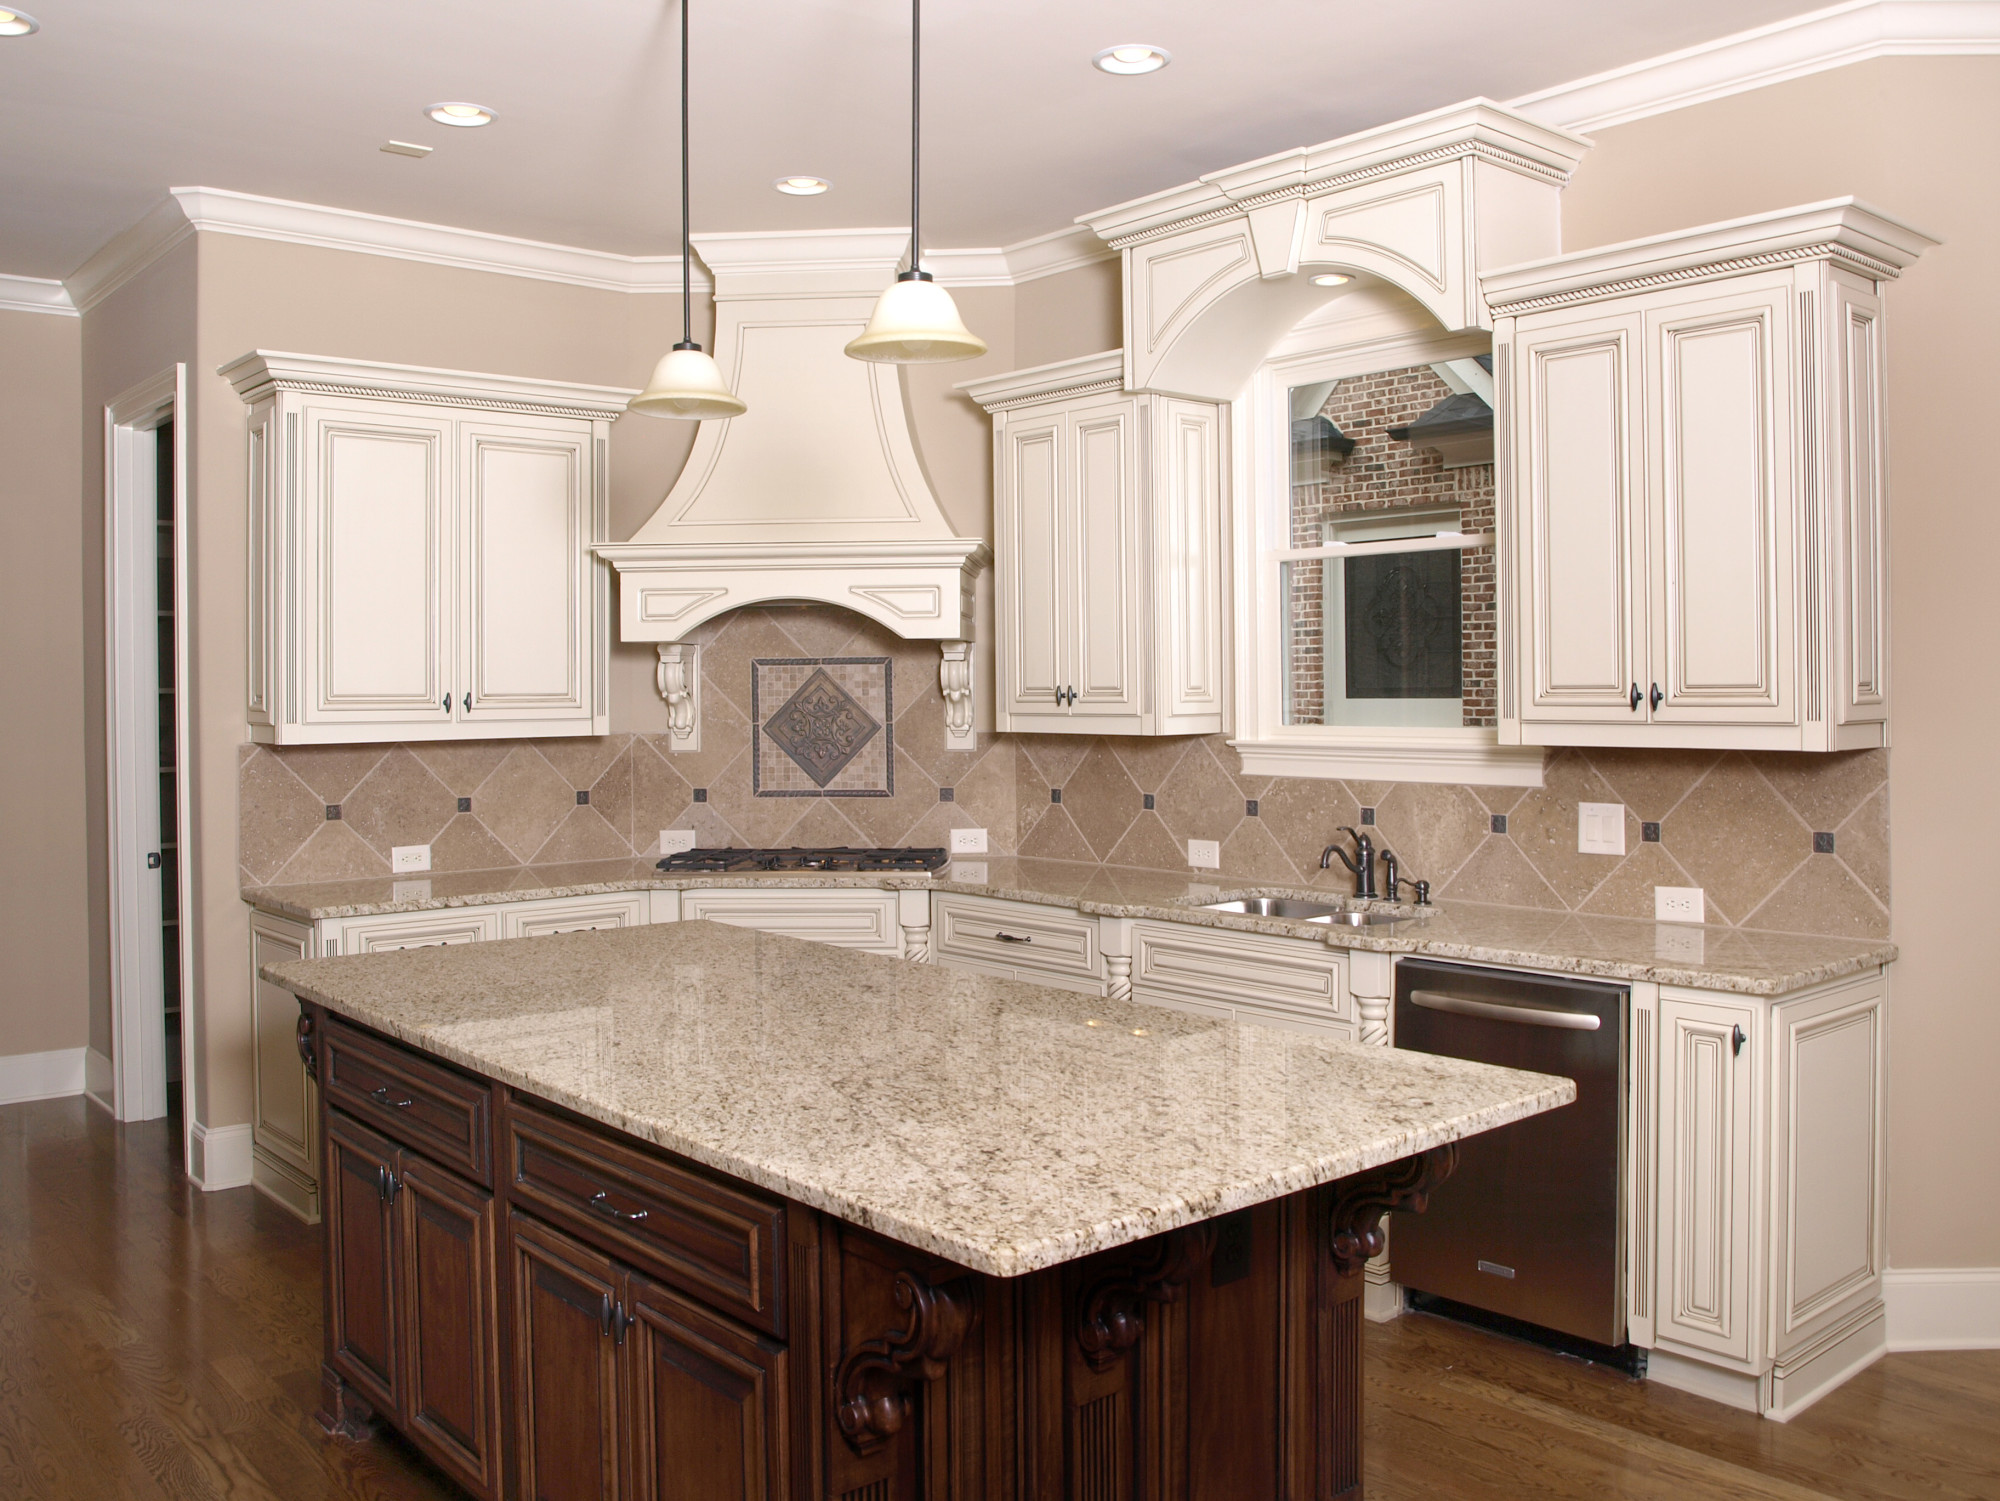 The Major Pros and Cons of Kitchen Granite Countertops